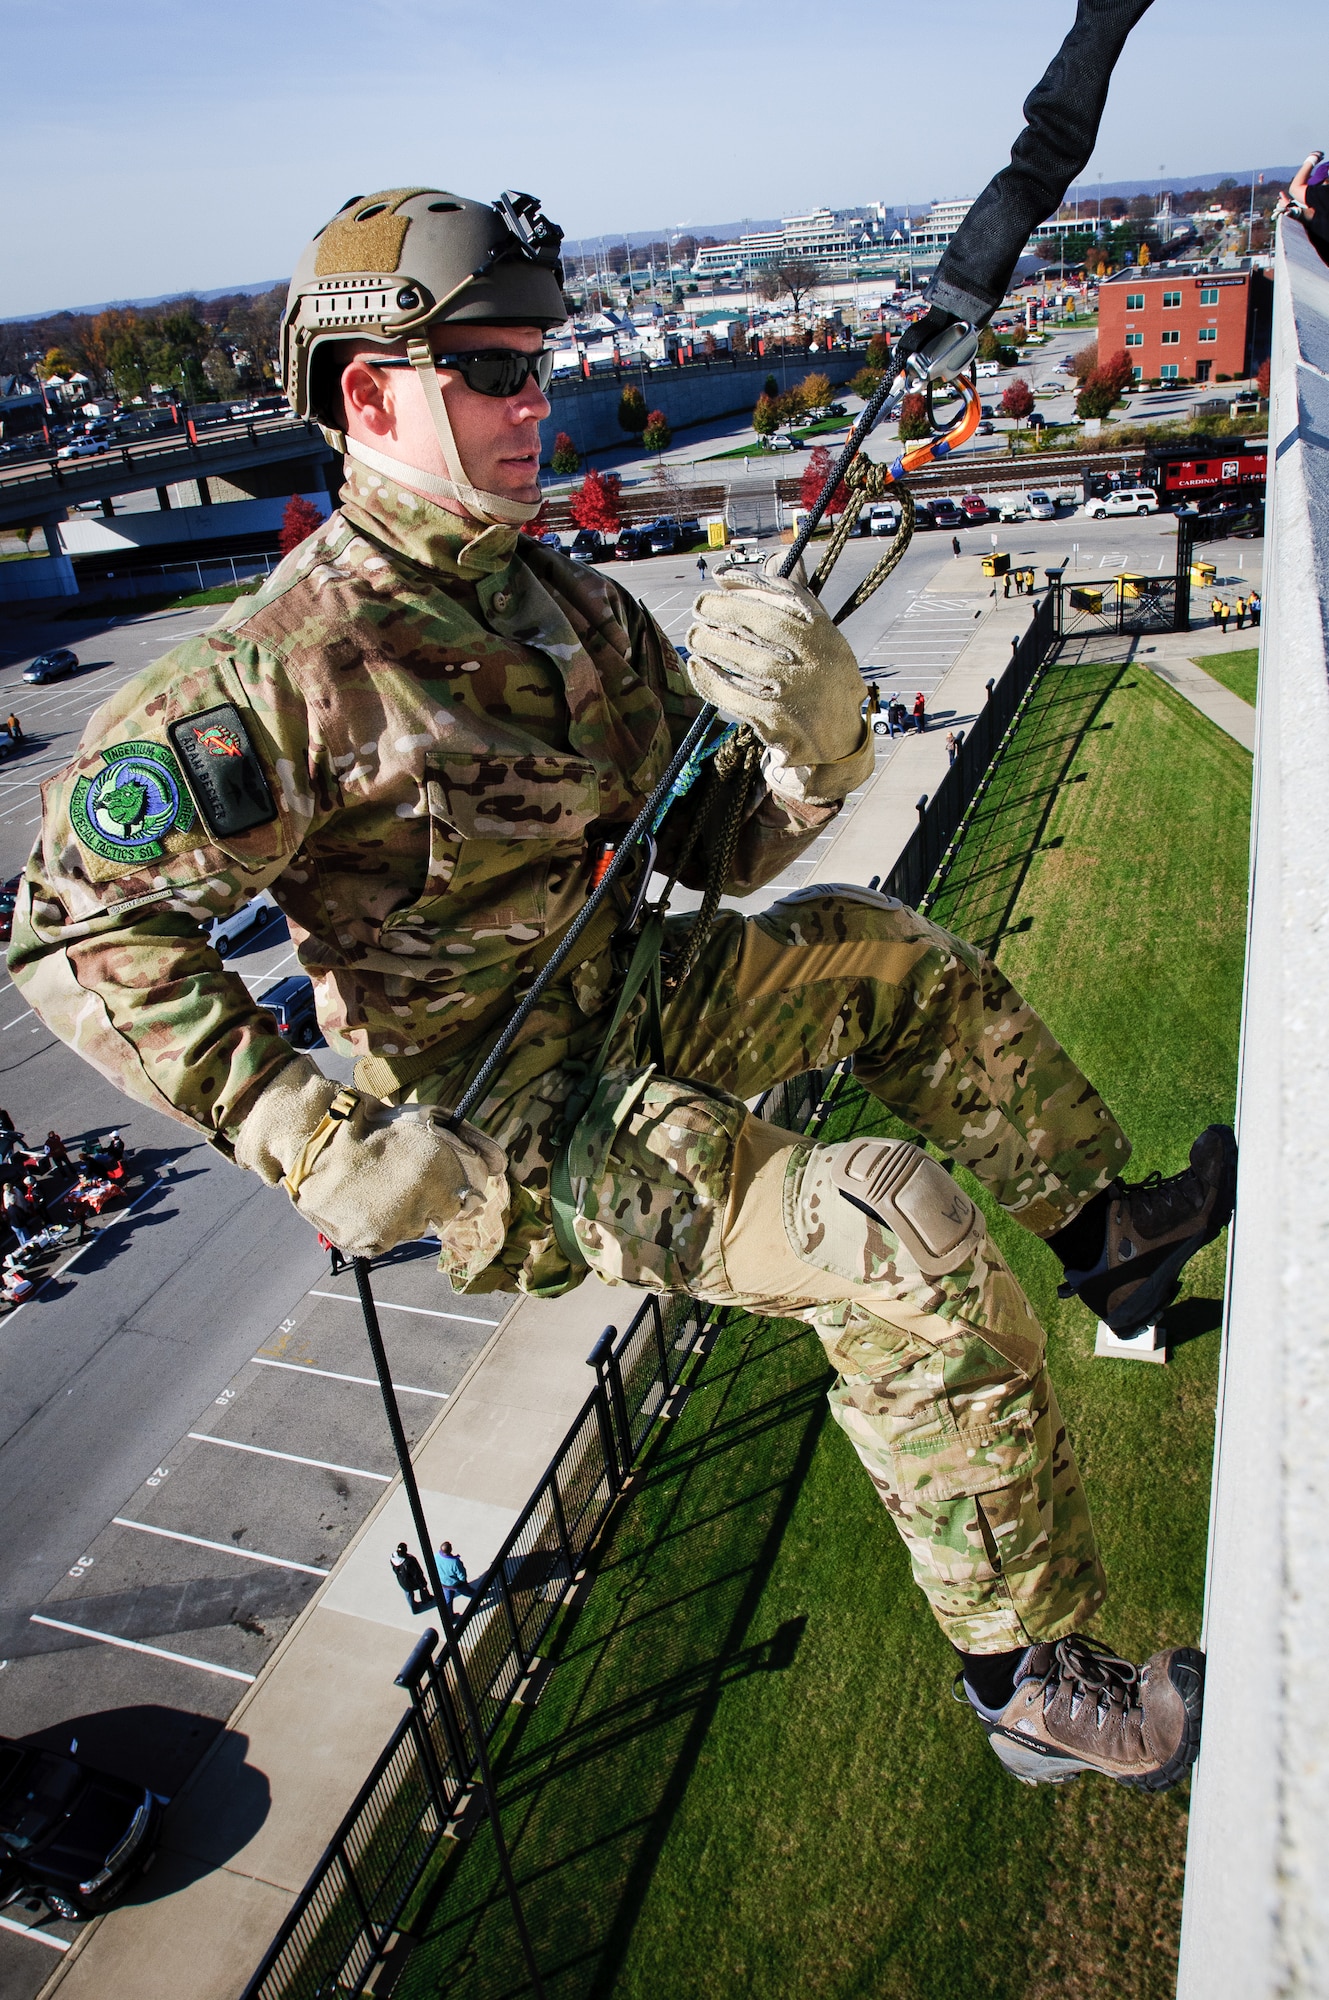 Staff Sgt. Adam Becker, a pararescueman from the Kentucky Air National Guard's 123rd Special Tactics Squadron, rappels down the side of University of Louisville Cardinal Stadium in Louisville, Ky., prior to the school's football match with Pittsburgh Nov. 12, 2011. The tactical demonstration was part of the school's annual Military Appreciation Day. (U.S. Air Force photo by Senior Airman Maxwell Rechel)